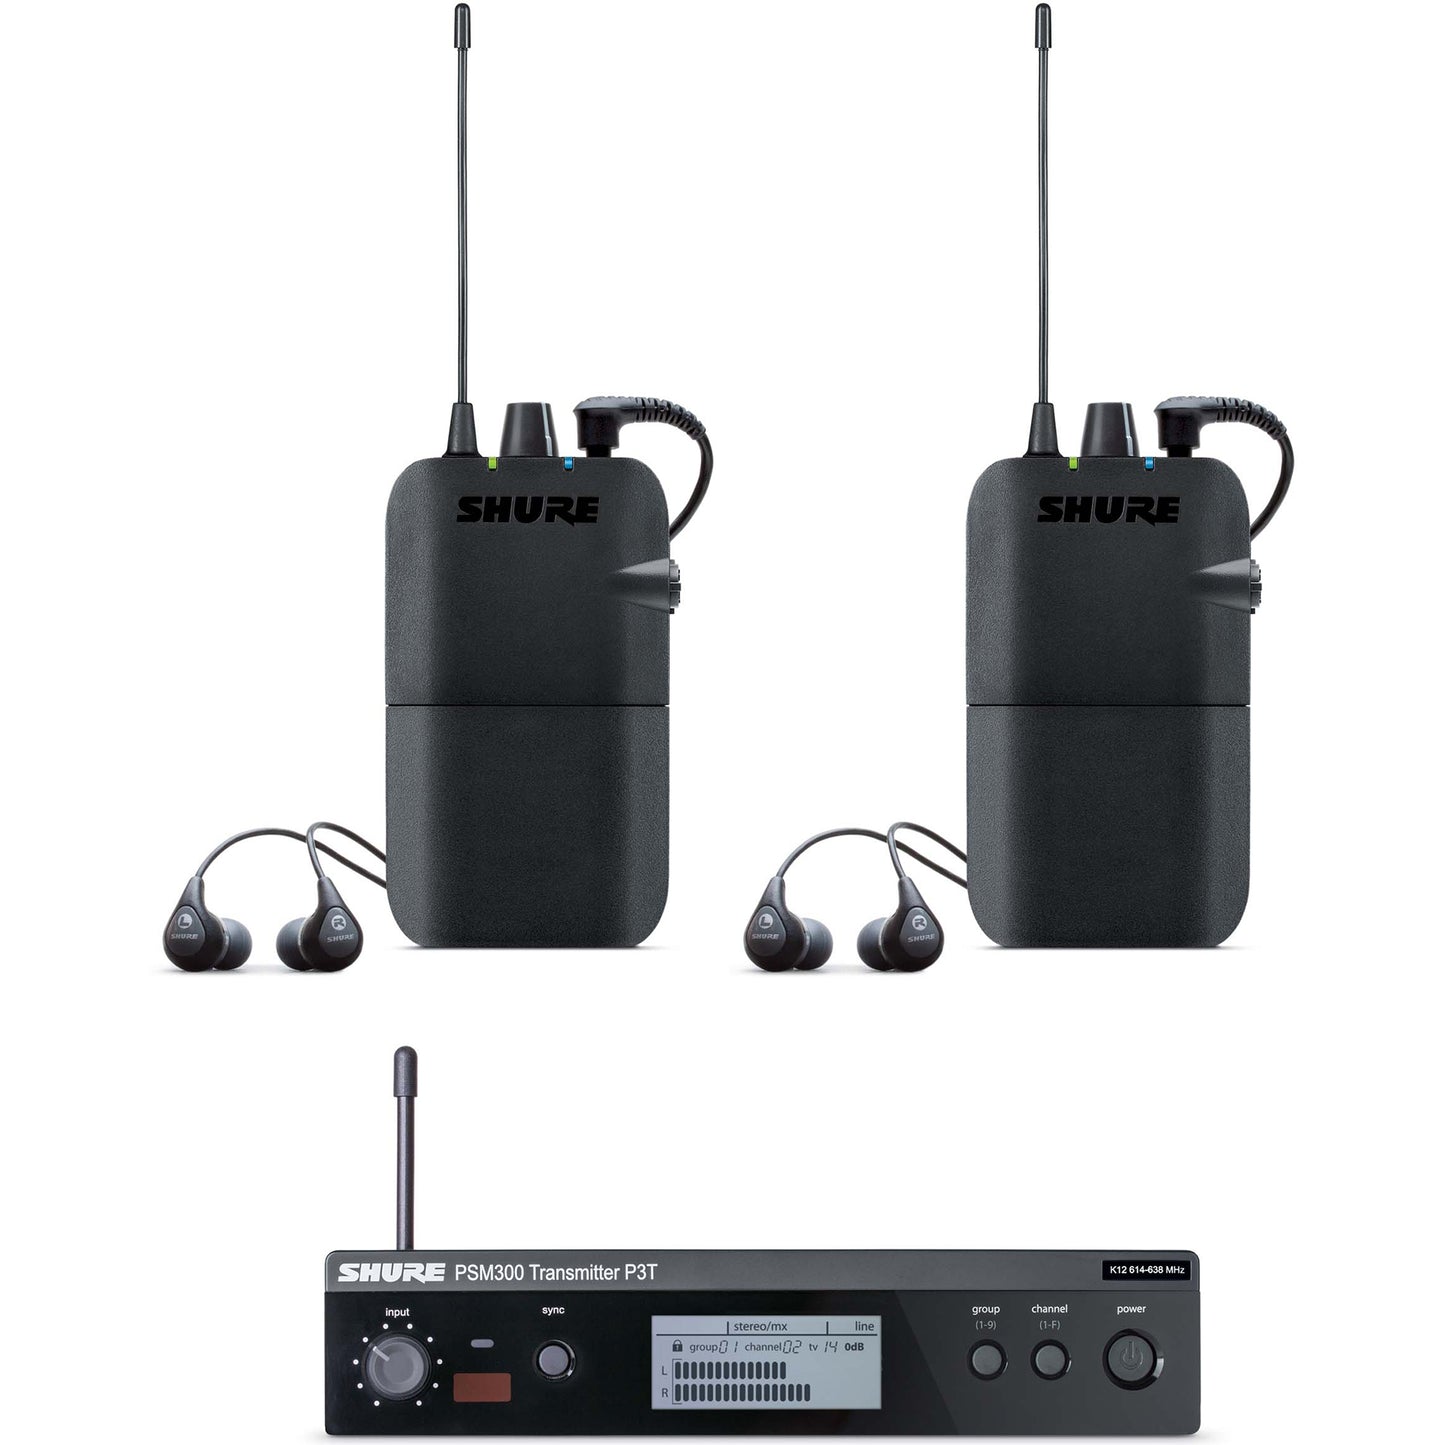 Shure PSM300 Twin Pack - H20 Frequency